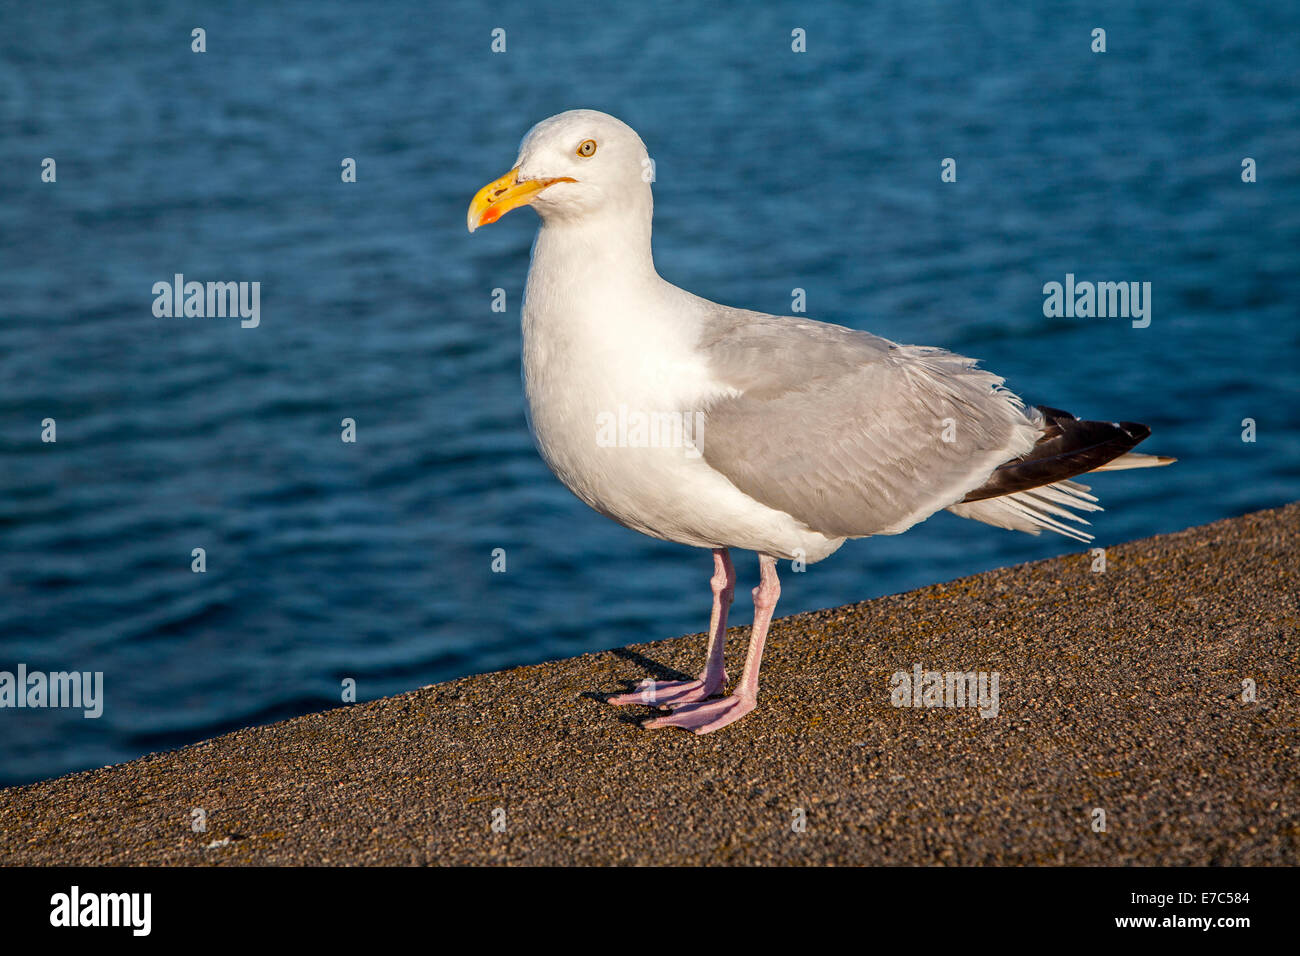 Close up of Herring gull, Larus argentatus, standing on wall with sea behind, paignton, Devon, England Stock Photo